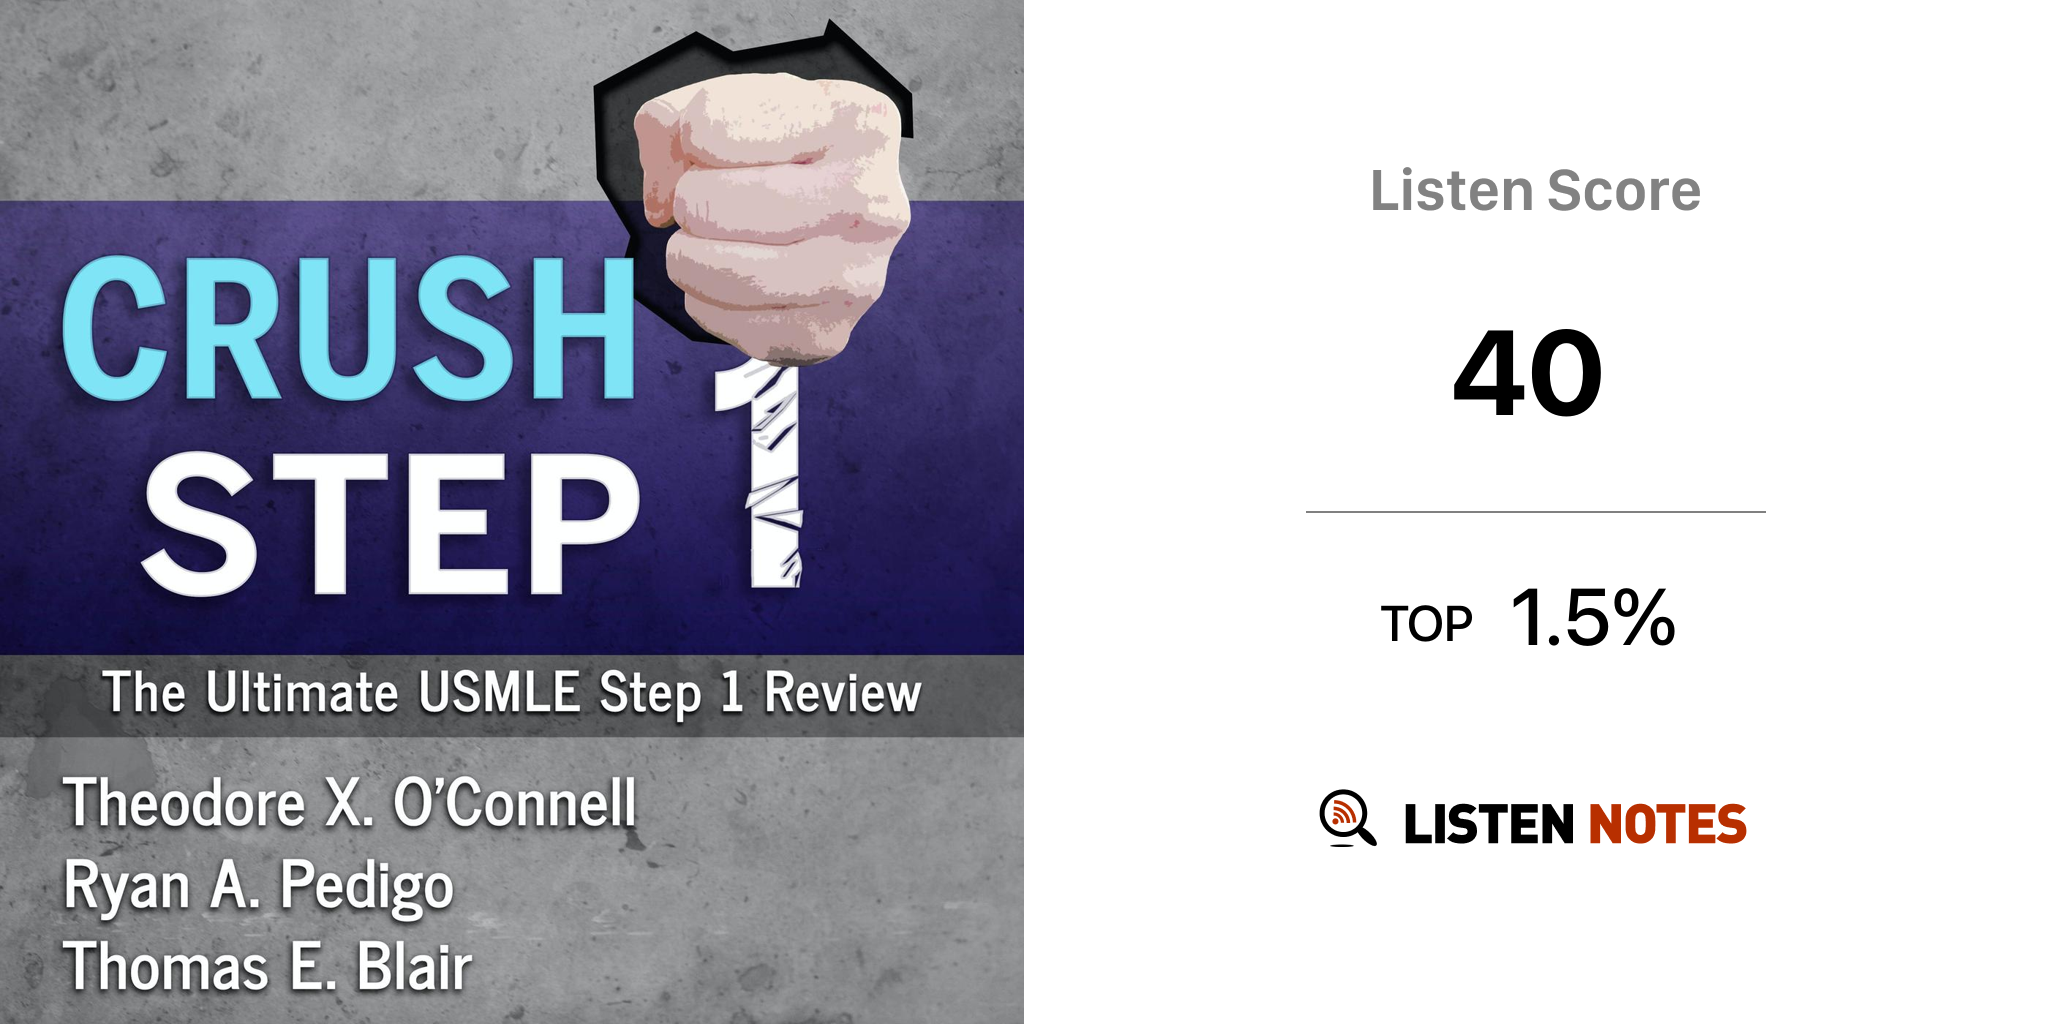 Crush Step 1 The Ultimate Usmle Step 1 Review Podcast Dr Ted Oconnell Listen Notes 0007